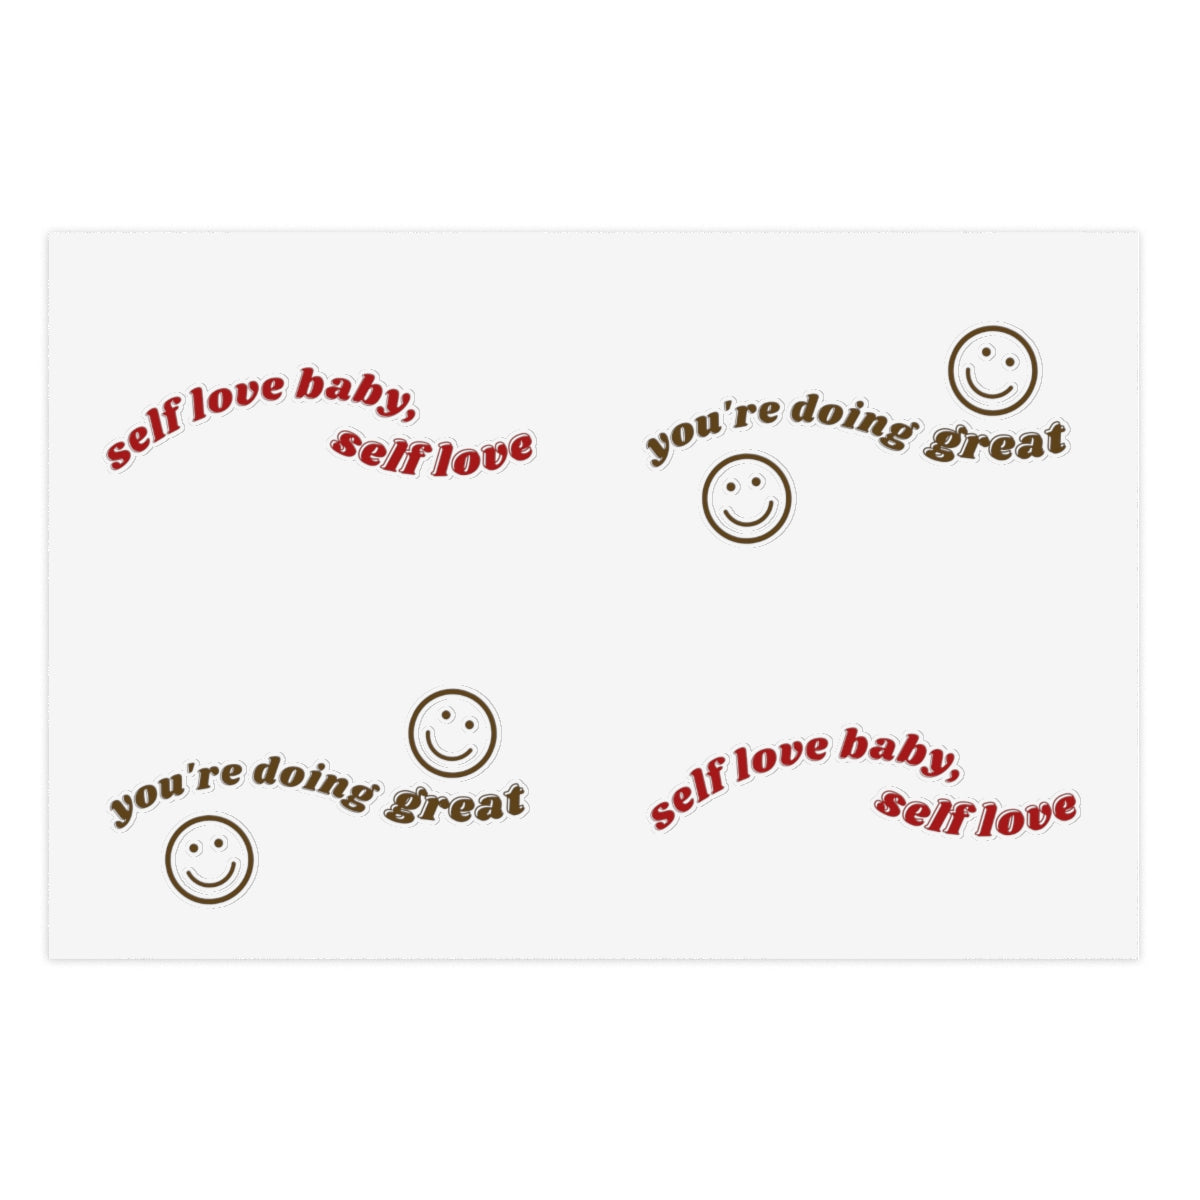 Self love Quotes Sticker Sheet